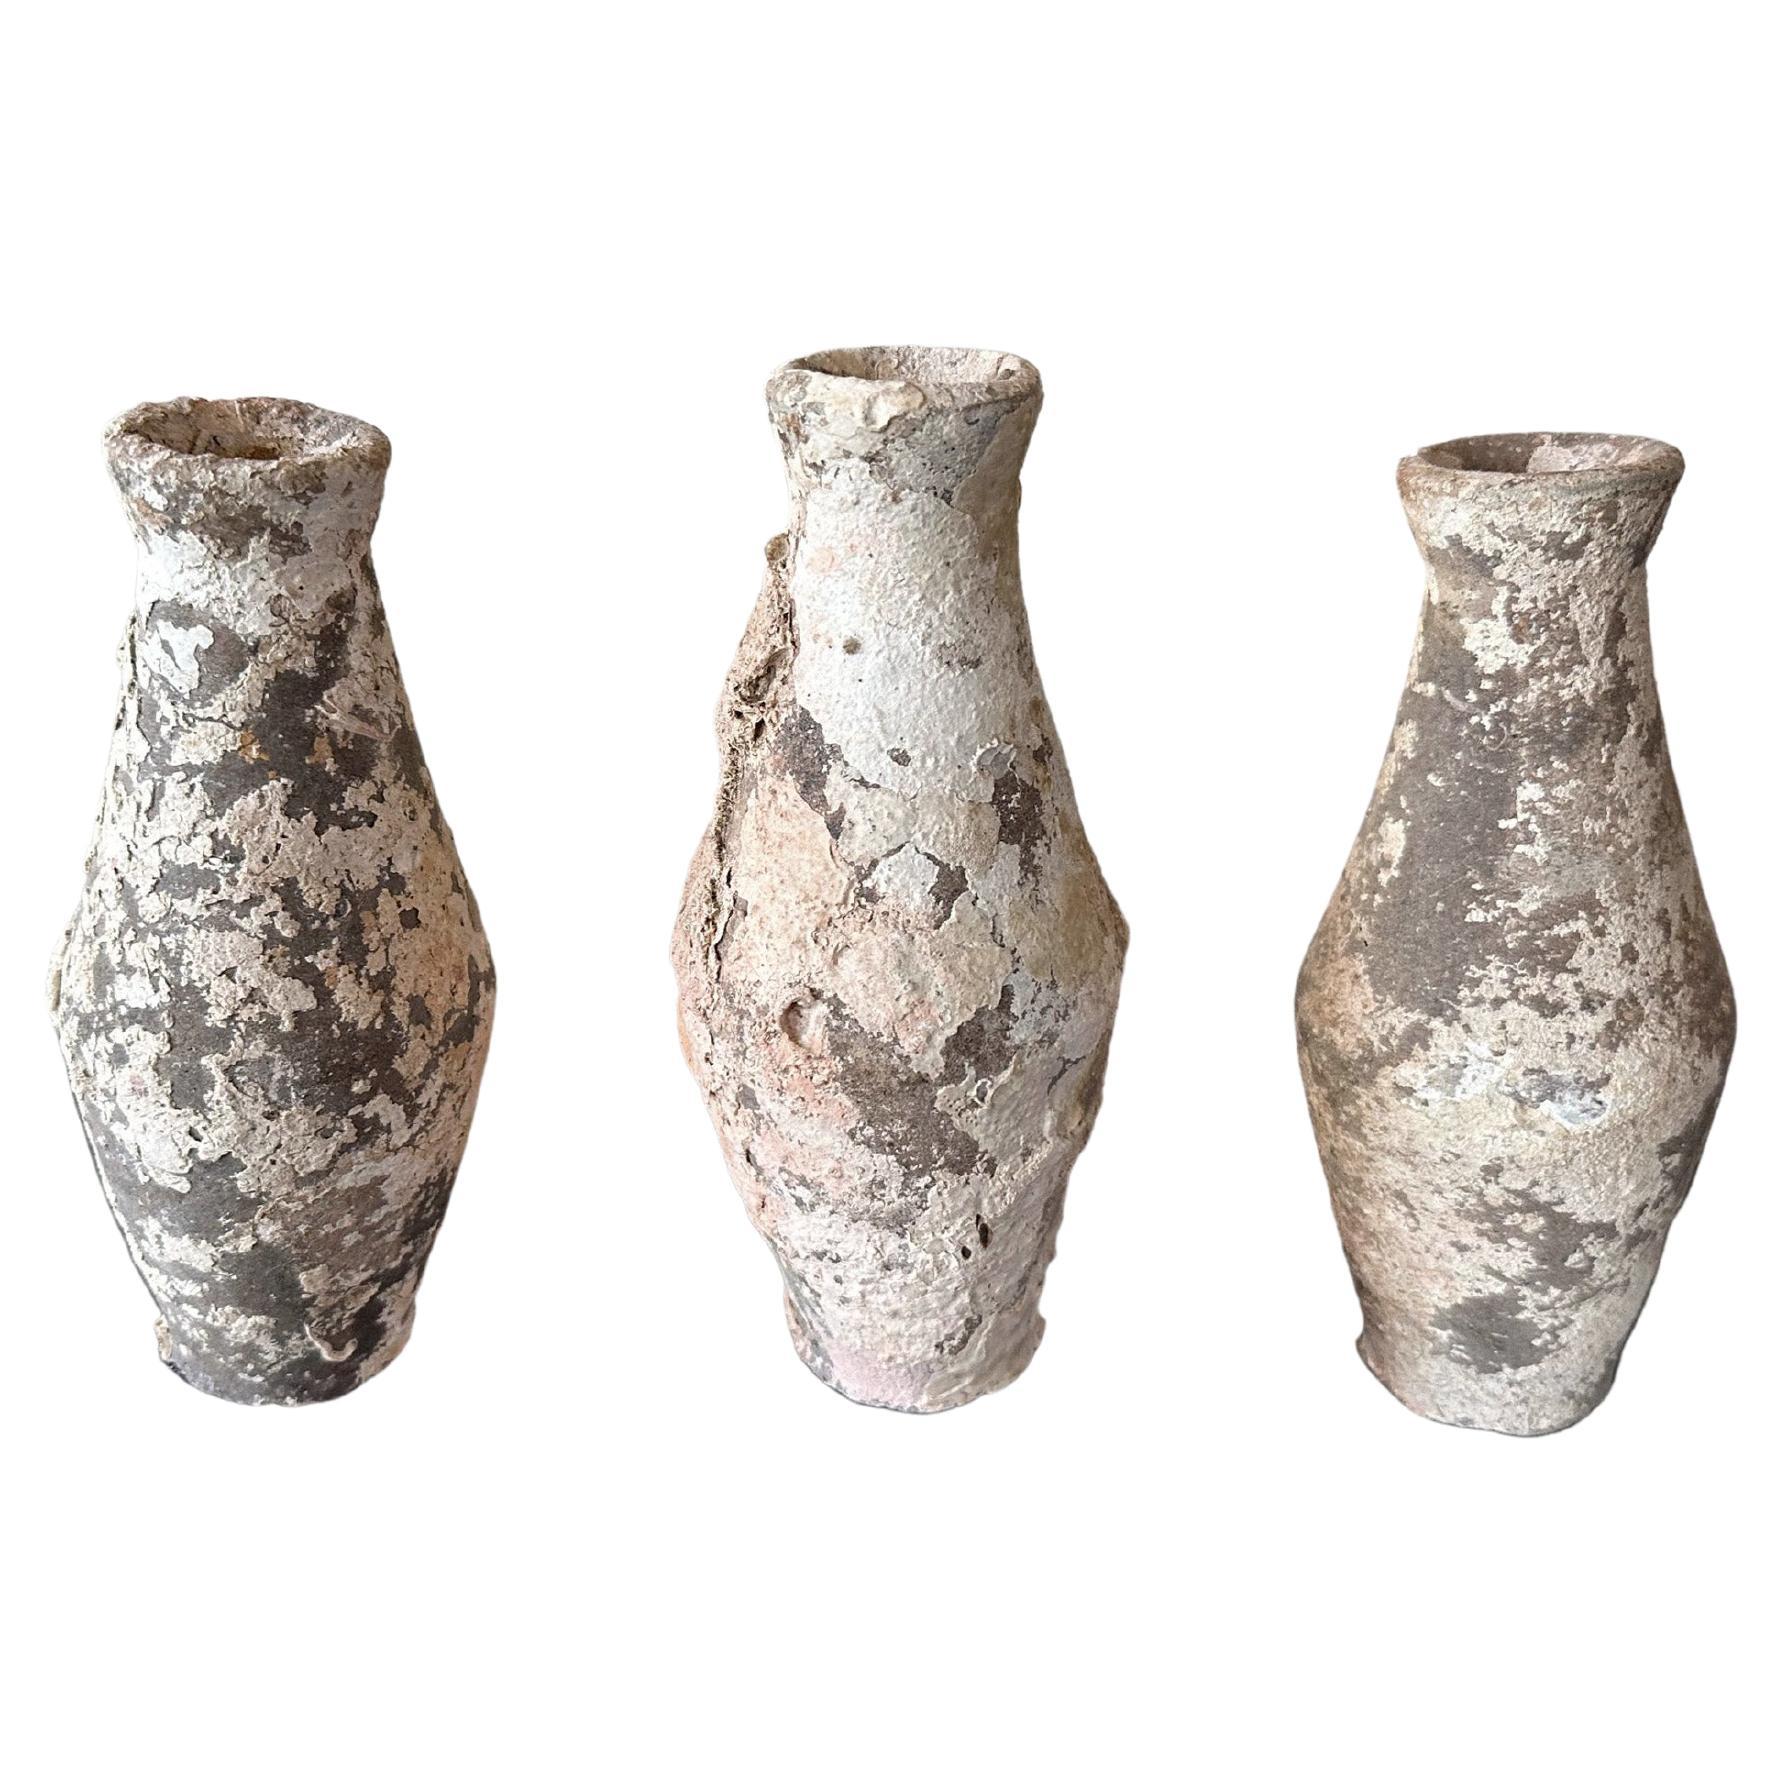 Set of Shipwreck Bottles from Indonesia c. 1600